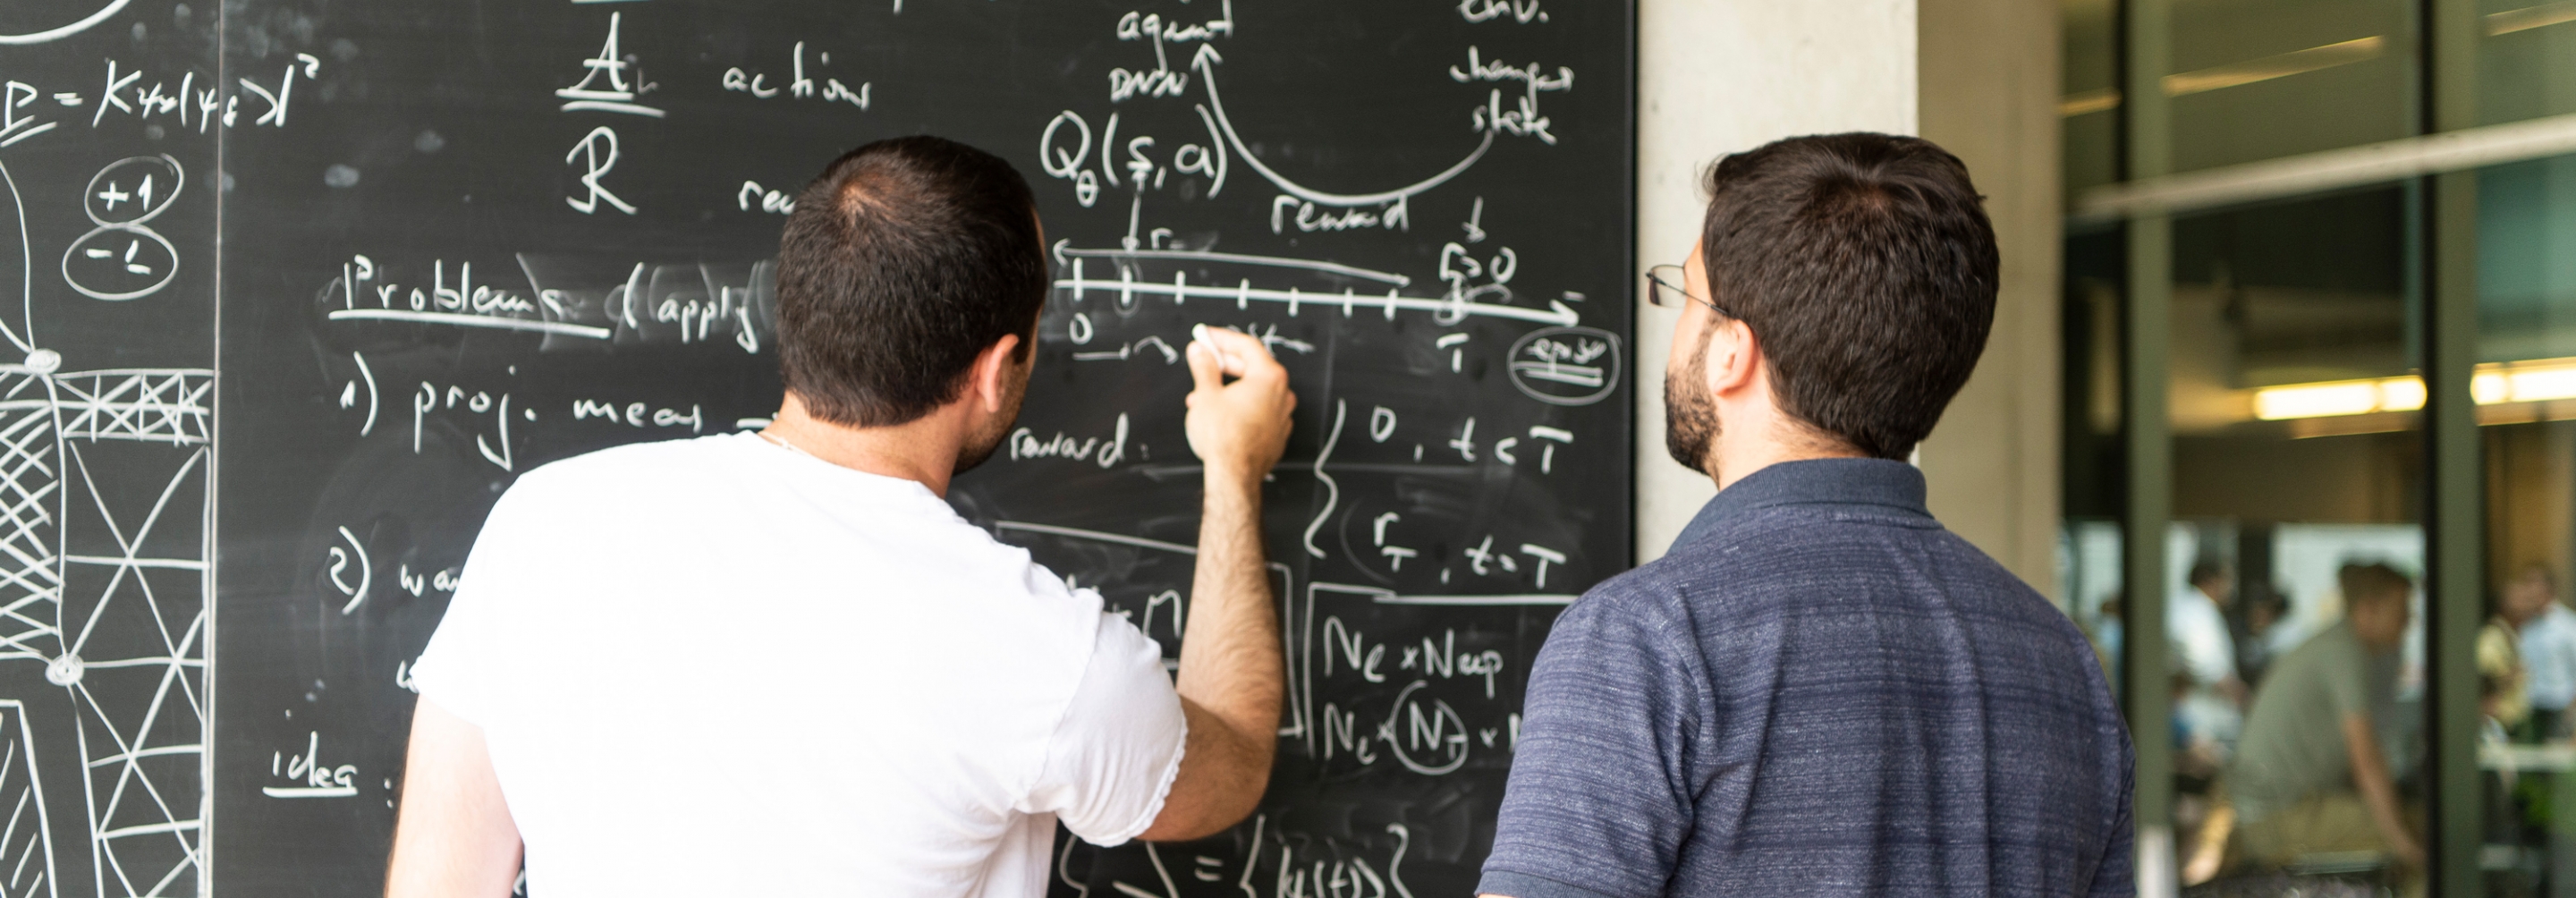 Two men working together on a blackboard